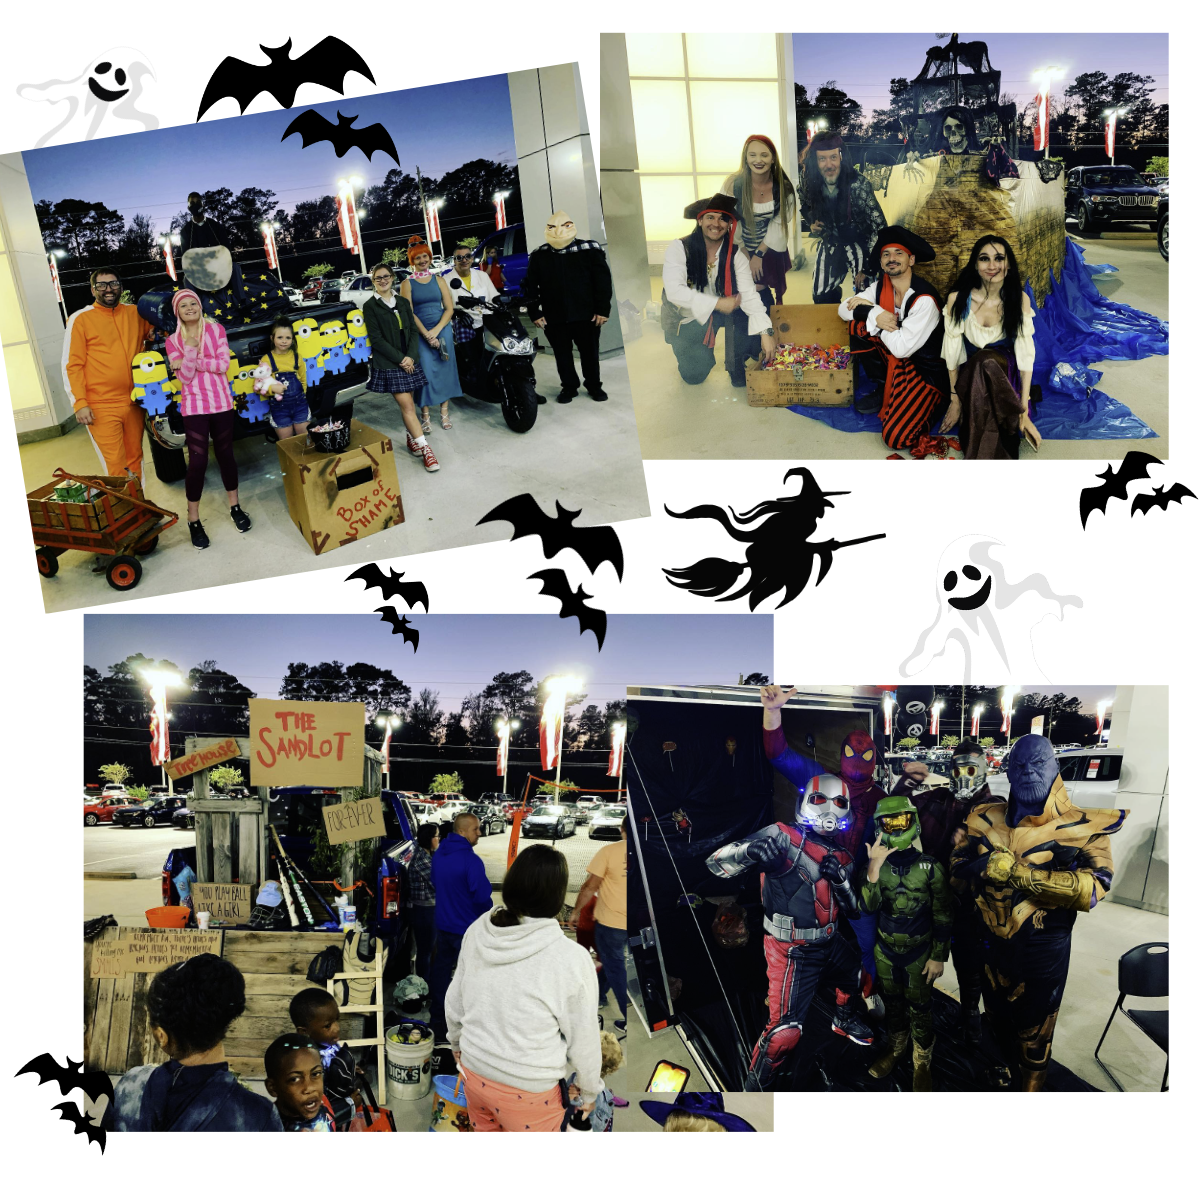 Trunk or Treat 2020